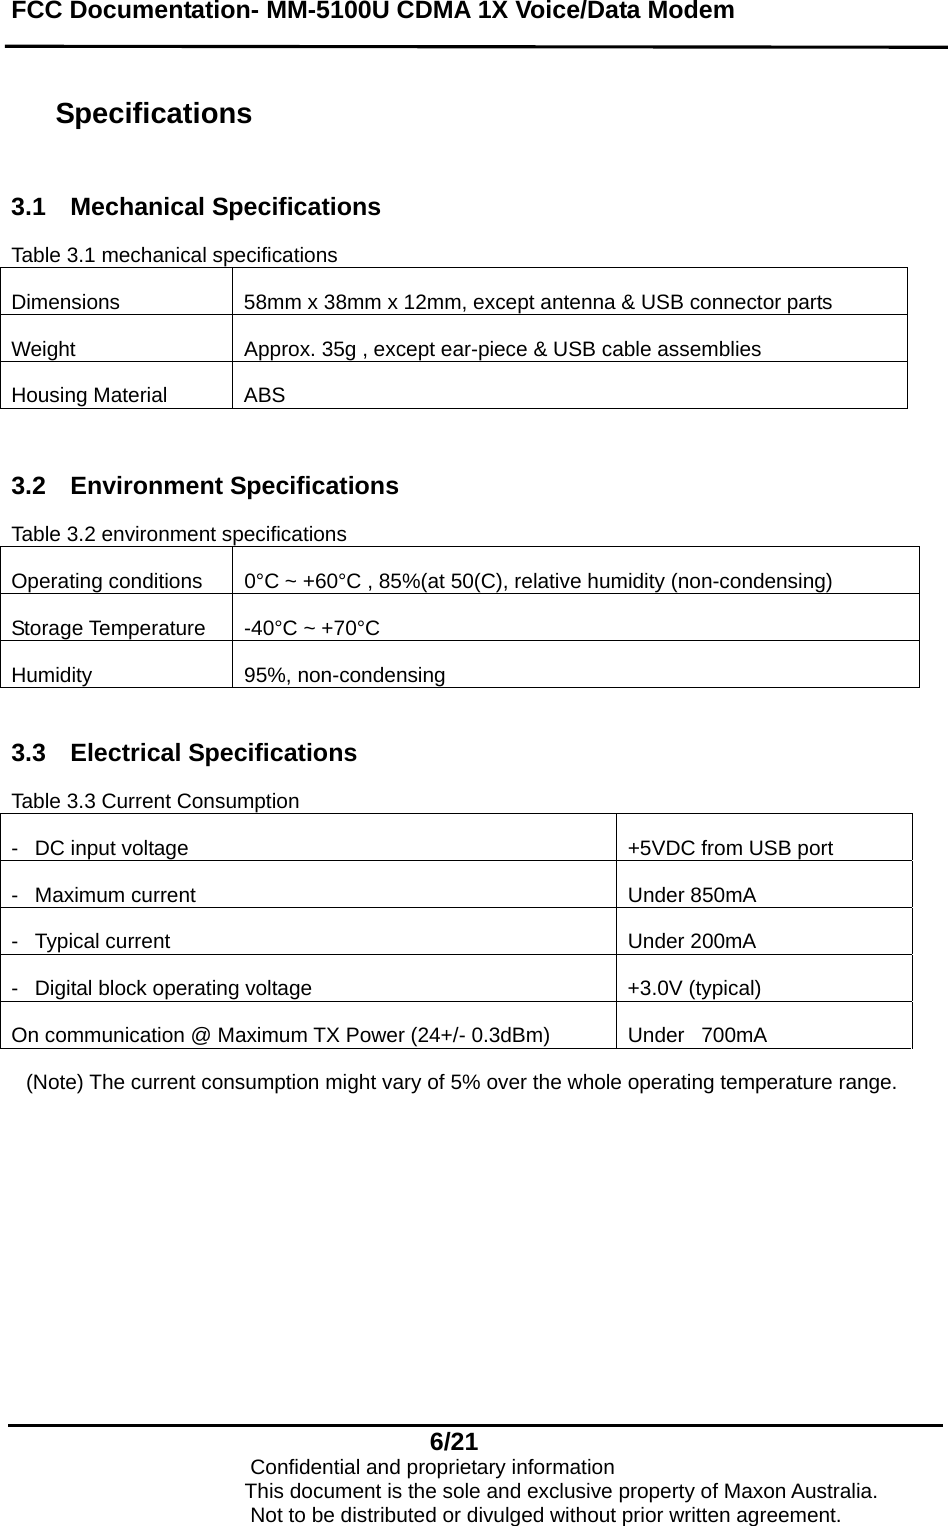 FCC Documentation- MM-5100U CDMA 1X Voice/Data Modem   Specifications  3.1 Mechanical Specifications  Table 3.1 mechanical specifications Dimensions  58mm x 38mm x 12mm, except antenna &amp; USB connector parts Weight  Approx. 35g , except ear-piece &amp; USB cable assemblies Housing Material  ABS  3.2 Environment Specifications Table 3.2 environment specifications Operating conditions   0°C ~ +60°C , 85%(at 50(C), relative humidity (non-condensing) Storage Temperature  -40°C ~ +70°C Humidity 95%, non-condensing  3.3 Electrical Specifications  Table 3.3 Current Consumption -  DC input voltage  +5VDC from USB port -  Maximum current   Under 850mA -  Typical current   Under 200mA -  Digital block operating voltage   +3.0V (typical) On communication @ Maximum TX Power (24+/- 0.3dBm)  Under  700mA  (Note) The current consumption might vary of 5% over the whole operating temperature range.    6/21                            Confidential and proprietary information                       This document is the sole and exclusive property of Maxon Australia.                           Not to be distributed or divulged without prior written agreement. 